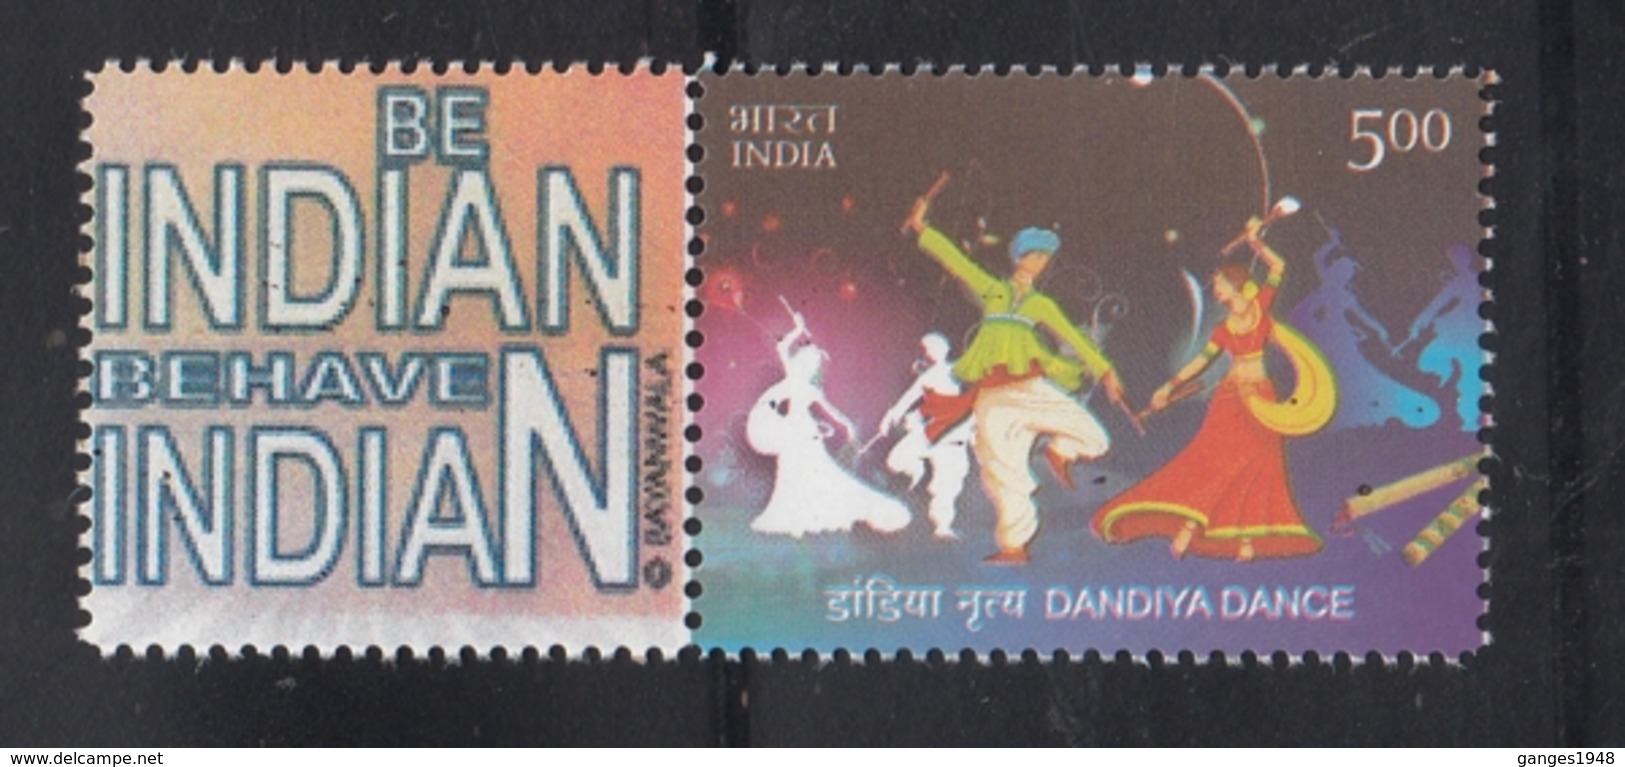 India  2016  Be Indian  Behave Indian  My Stamp  Dandiya Dance  Ahmedabad Issue  # 16867  D  Inde Indien - Unused Stamps